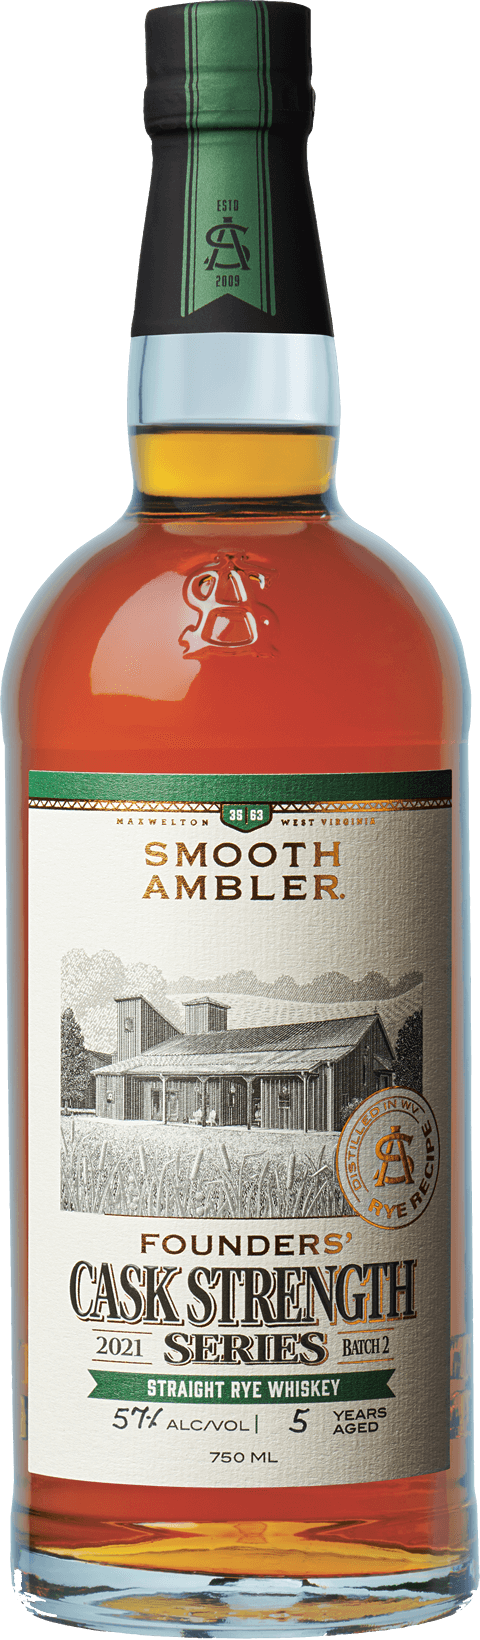 Smooth Ambler Founders Cask Strength Straight Rye Whiskey